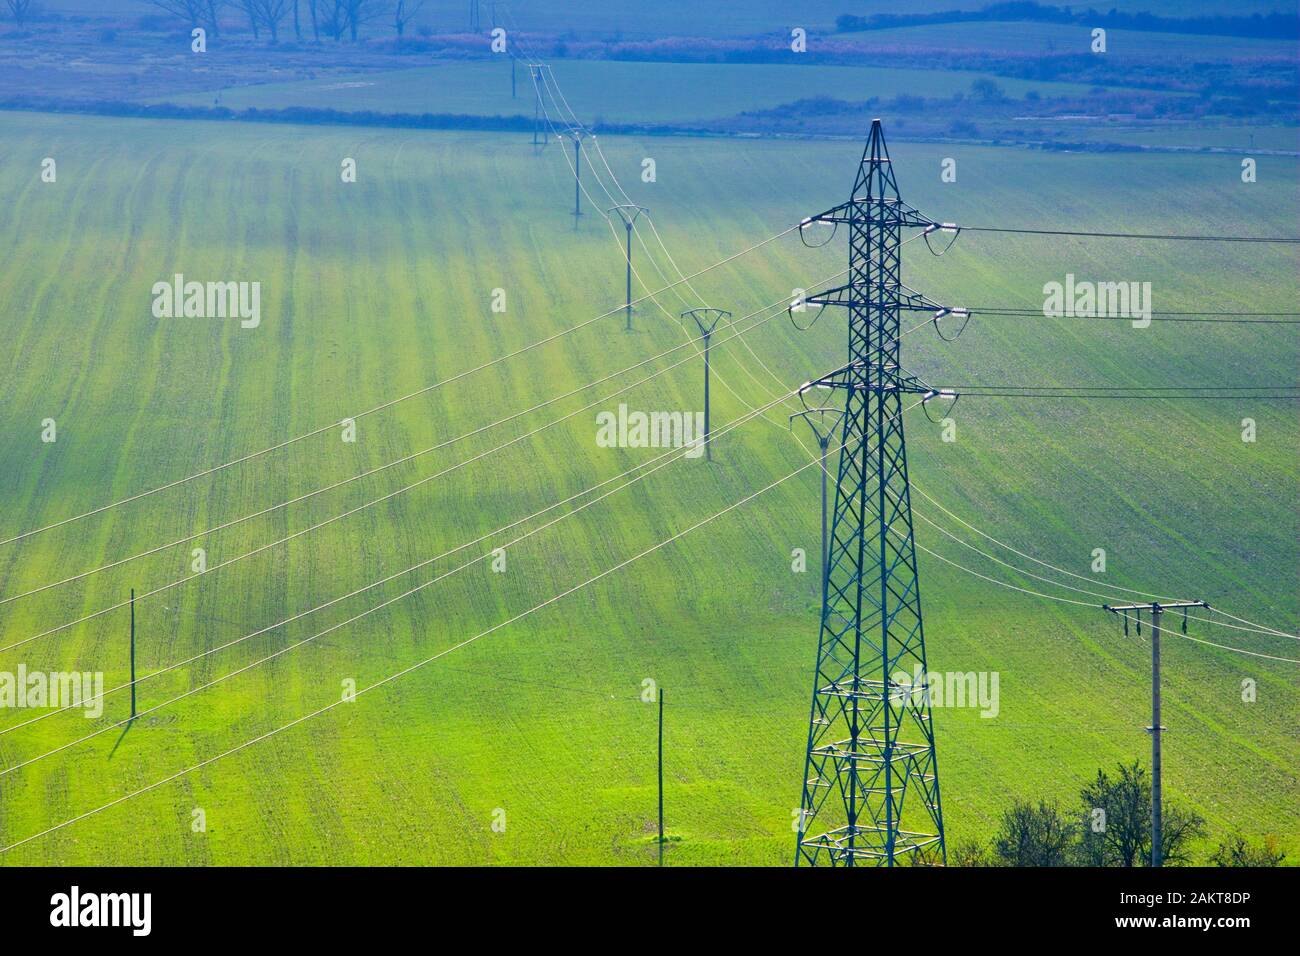 Transmission tower in a green landscape. Stock Photo